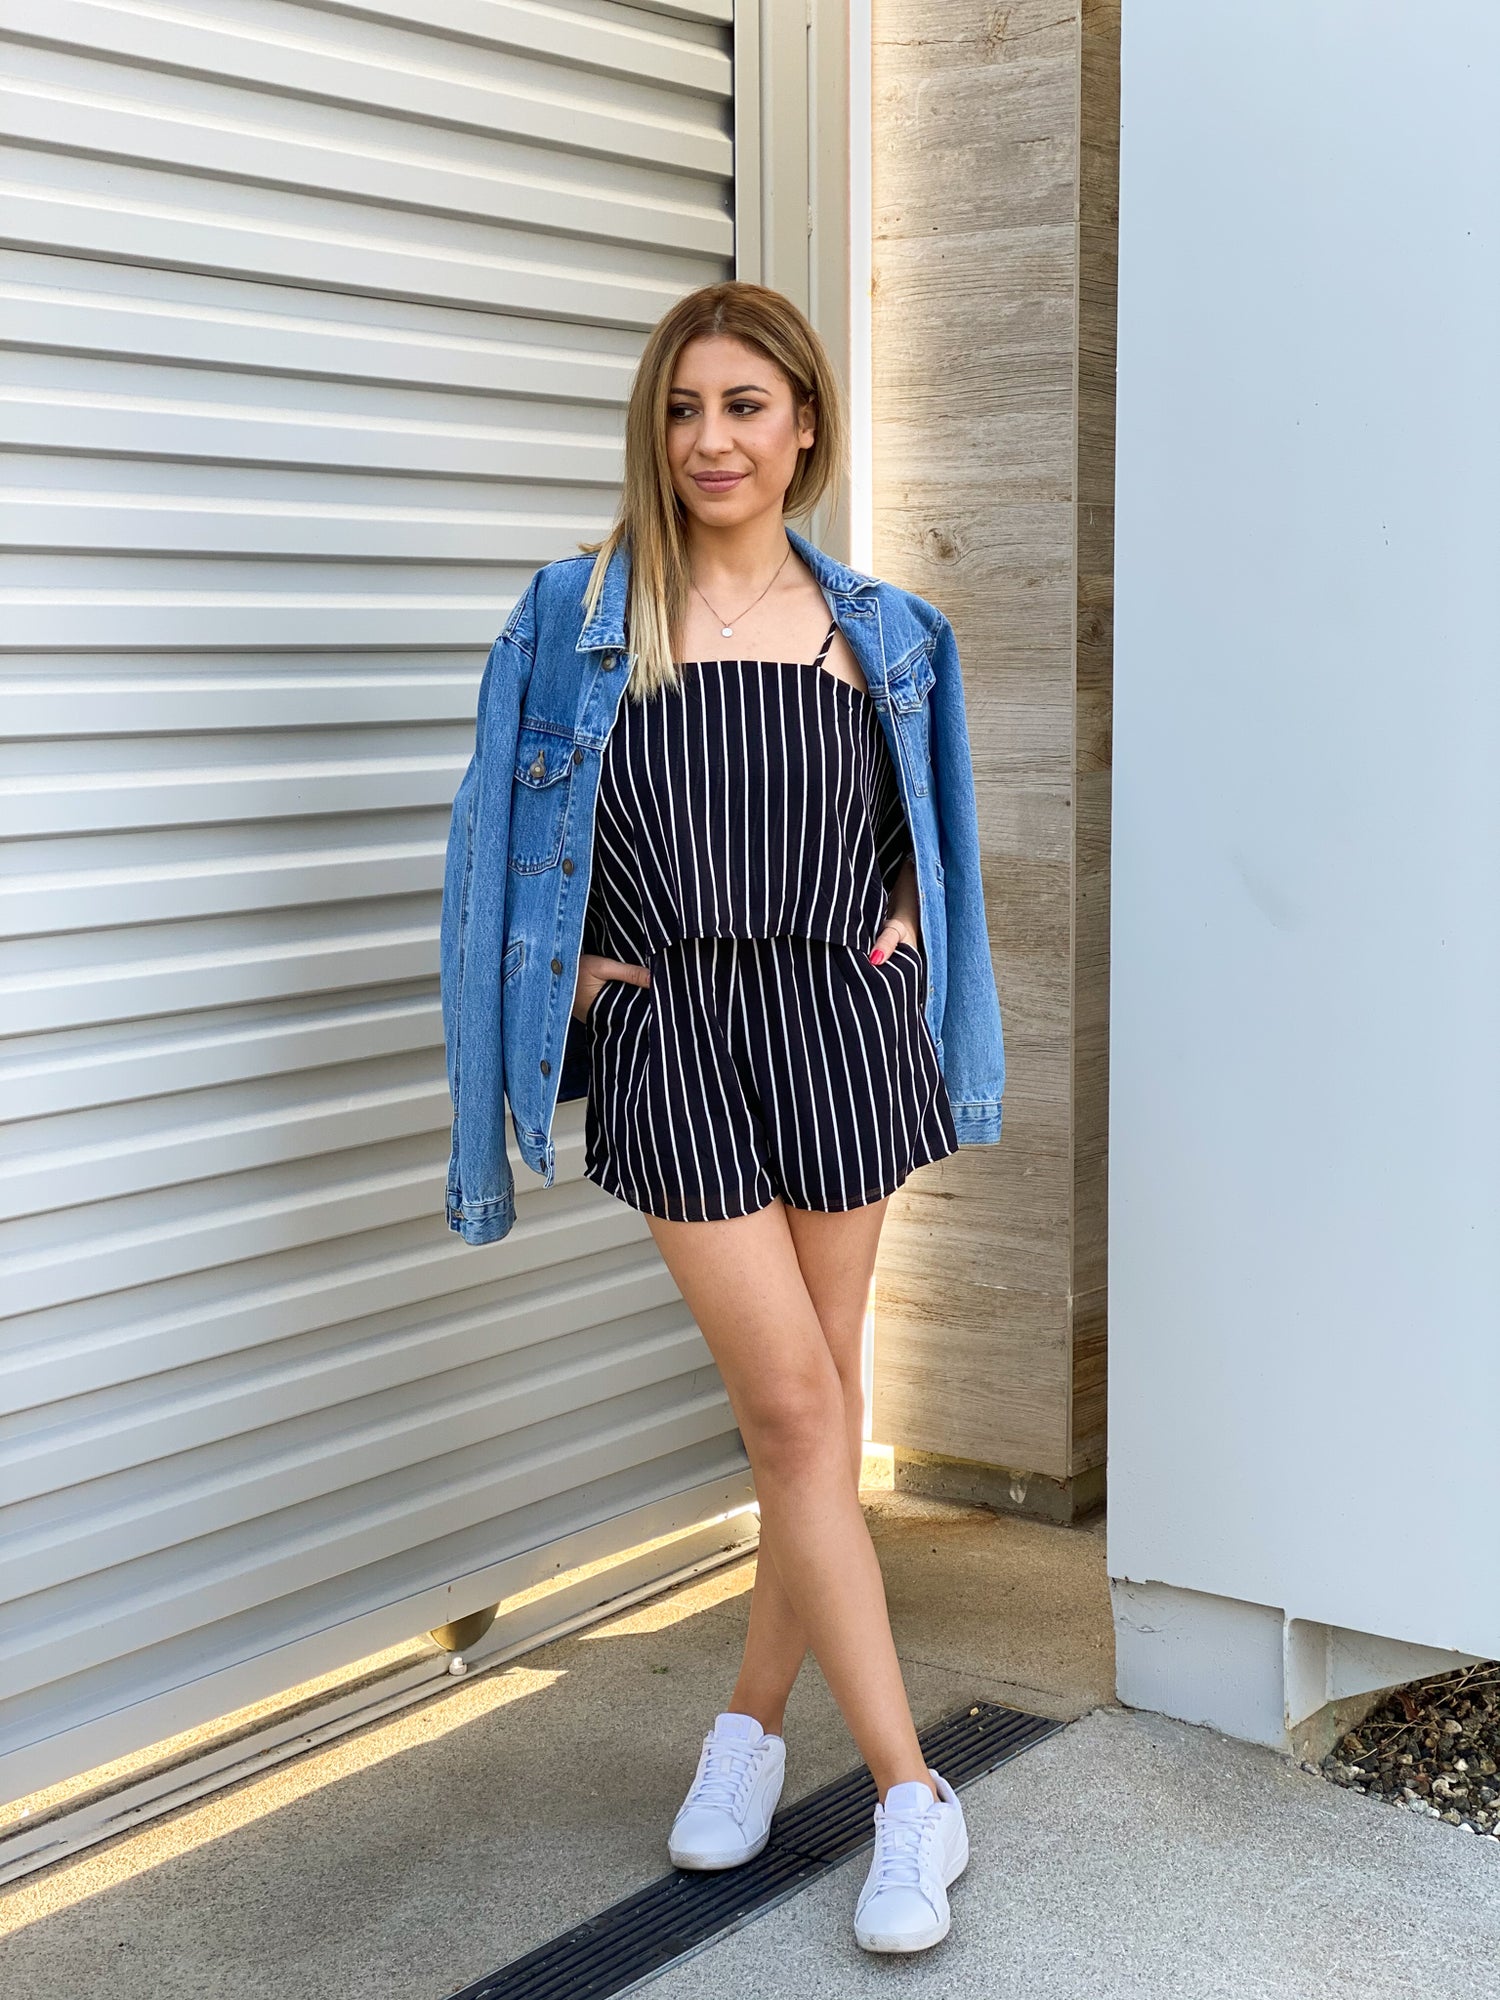 Women's trendy Black & White Striped Shoulder Cutout Romper. Adjustable Straps. Side Pockets and fully lined. Shop for a variety of styles at LazoChic.com